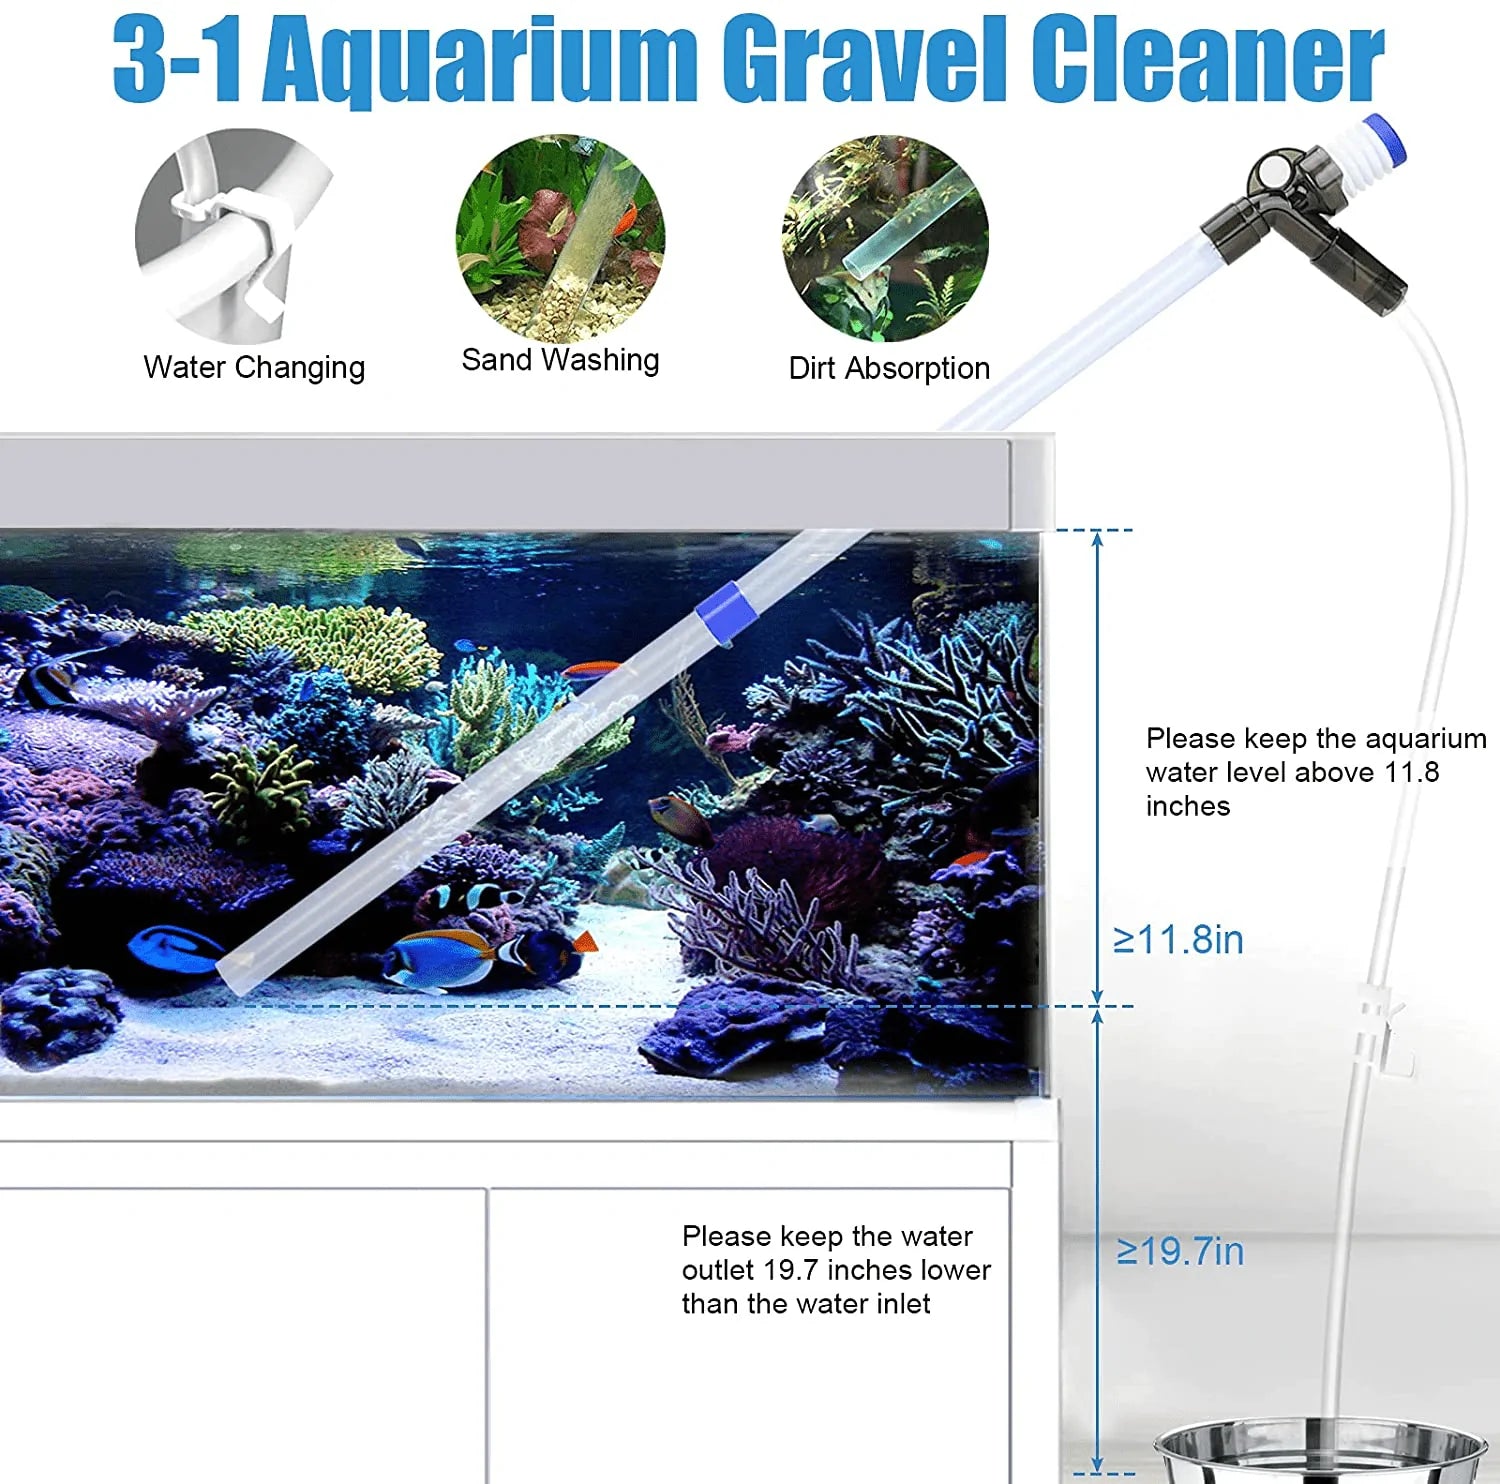 AQQA Aquarium Gravel Cleaner Fish Tank Sand Cleaner Kit Long Nozzle Water Changer with Air-Pressing Button and Adjustable Water Flow Controller for Water Changing and Filter Gravel Cleaning